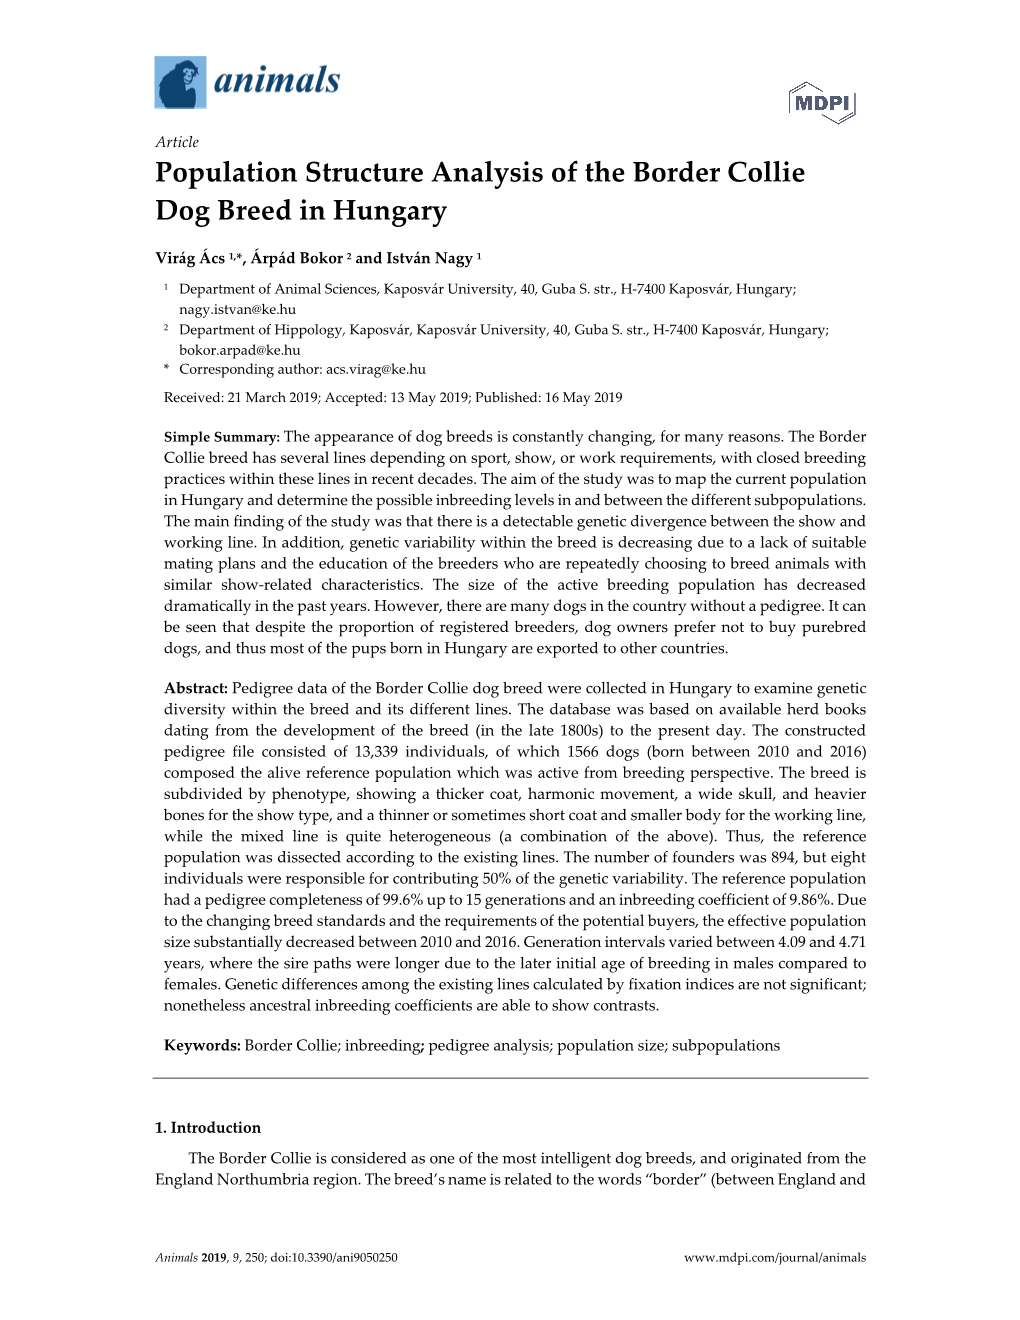 Population Structure Analysis of the Border Collie Dog Breed in Hungary